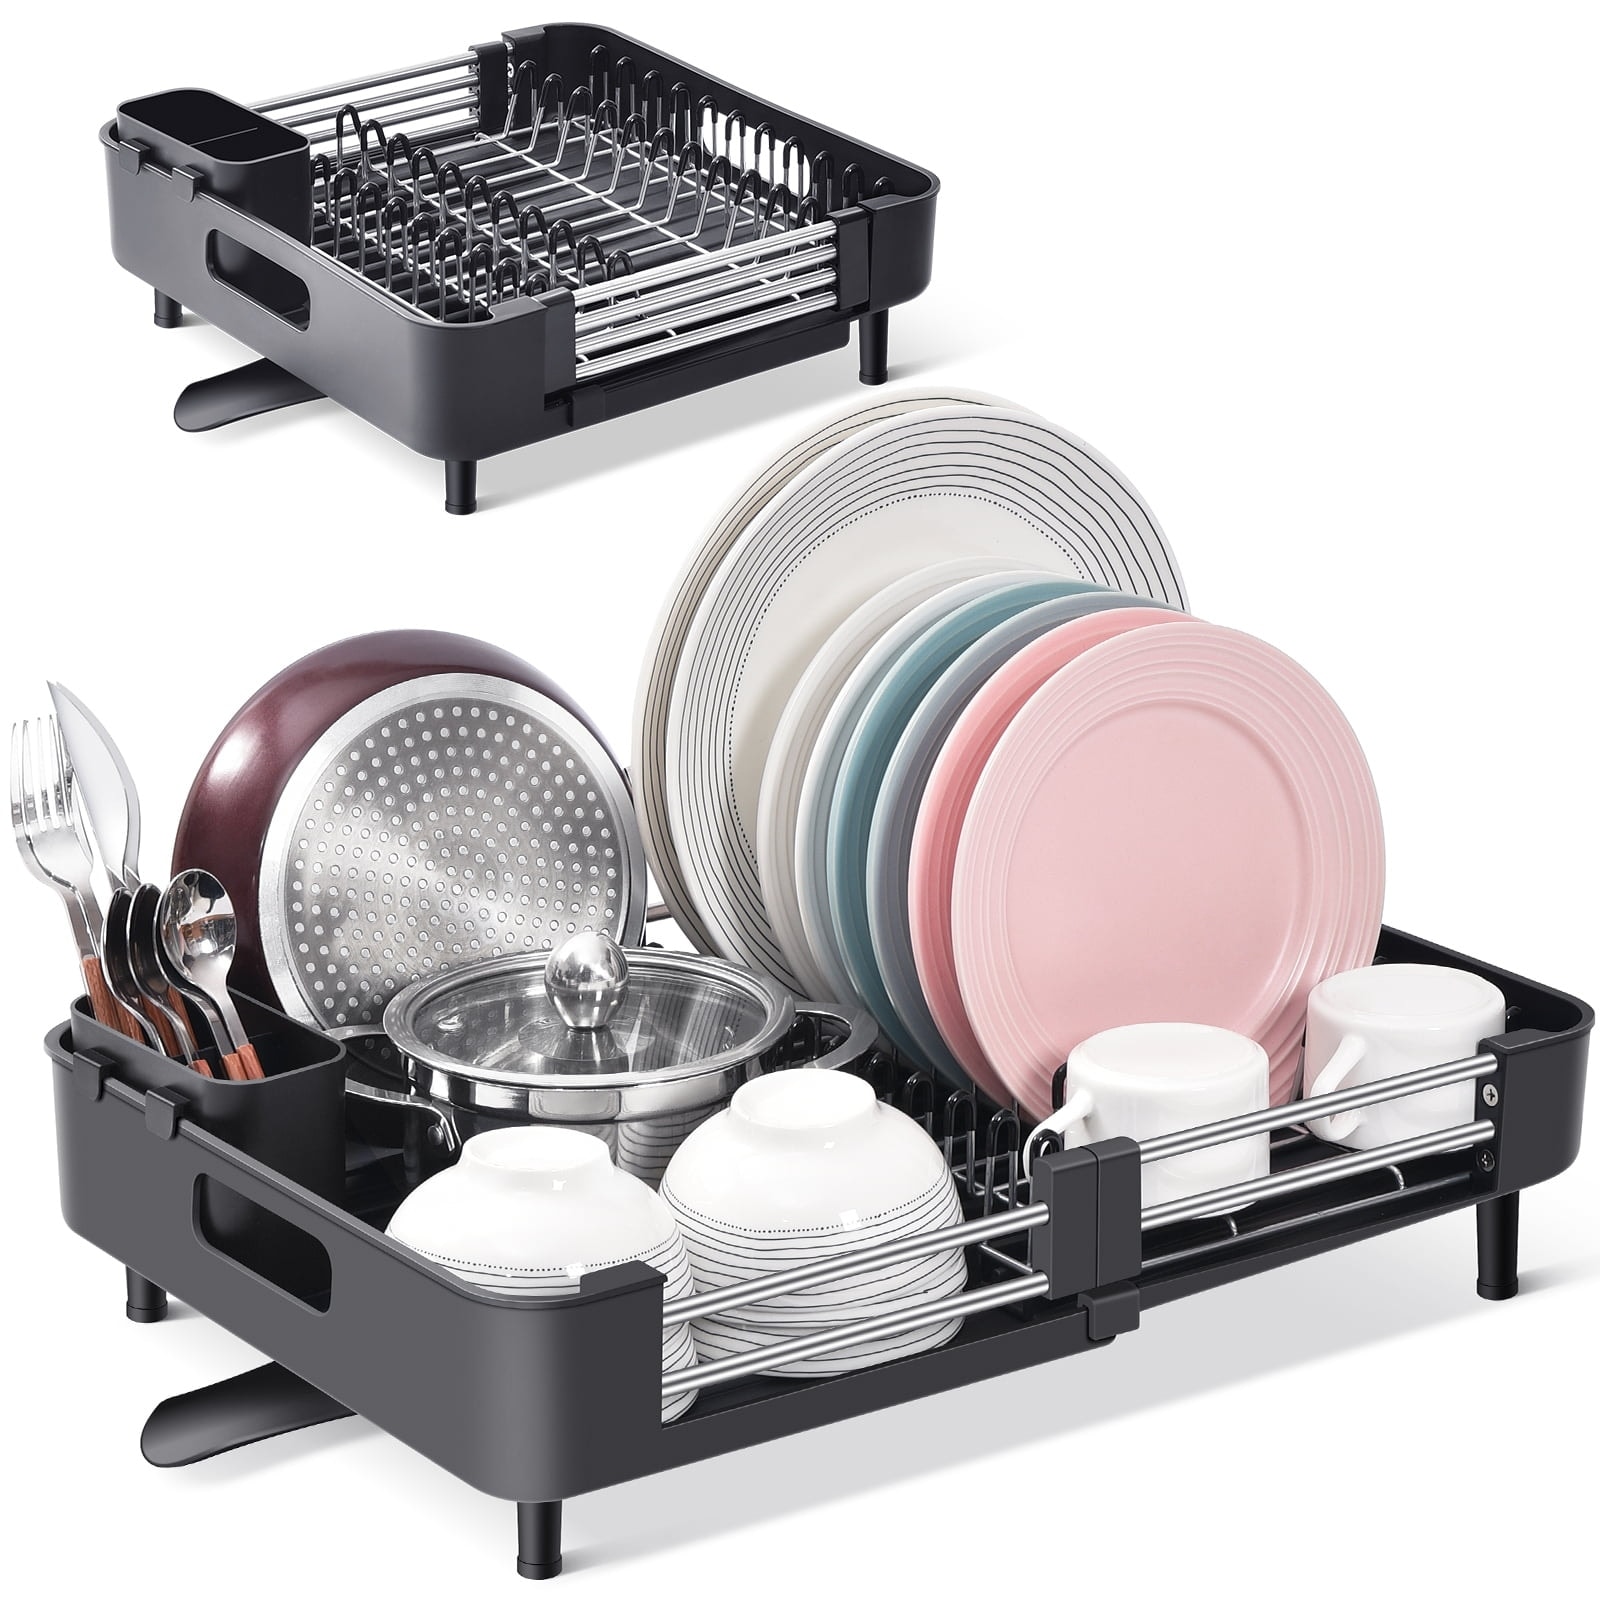 Adjustable Dish Drying Rack for Kitchen - On Sale - Bed Bath & Beyond -  37477744